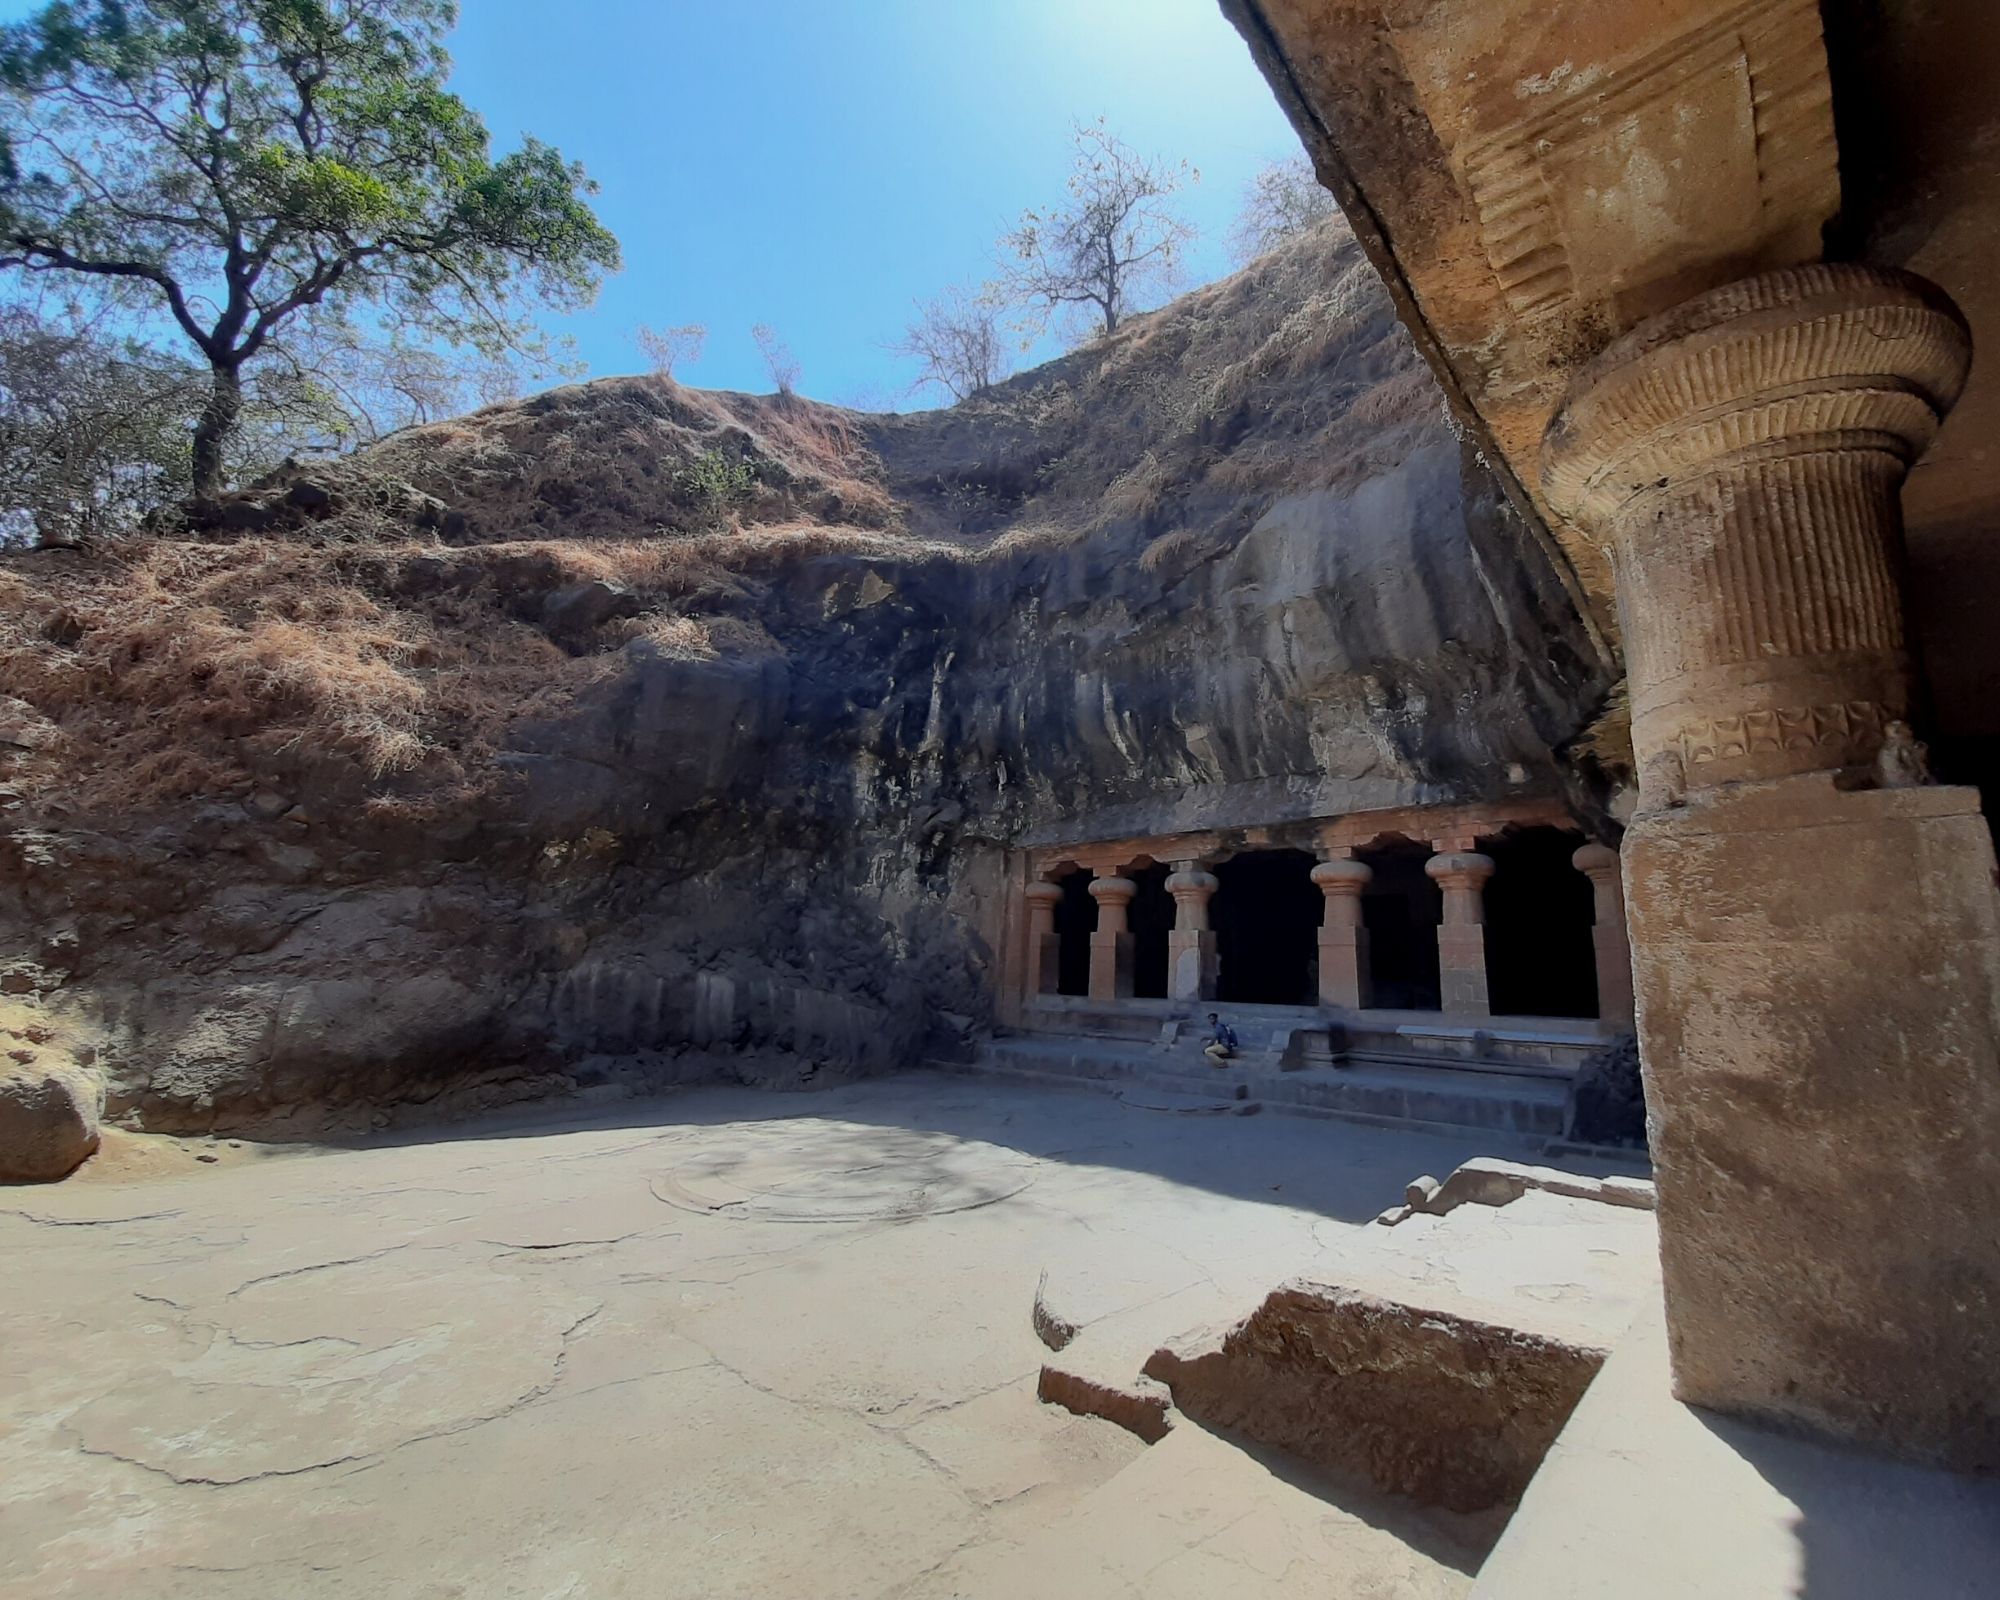 The first cave at Elephanta Caves